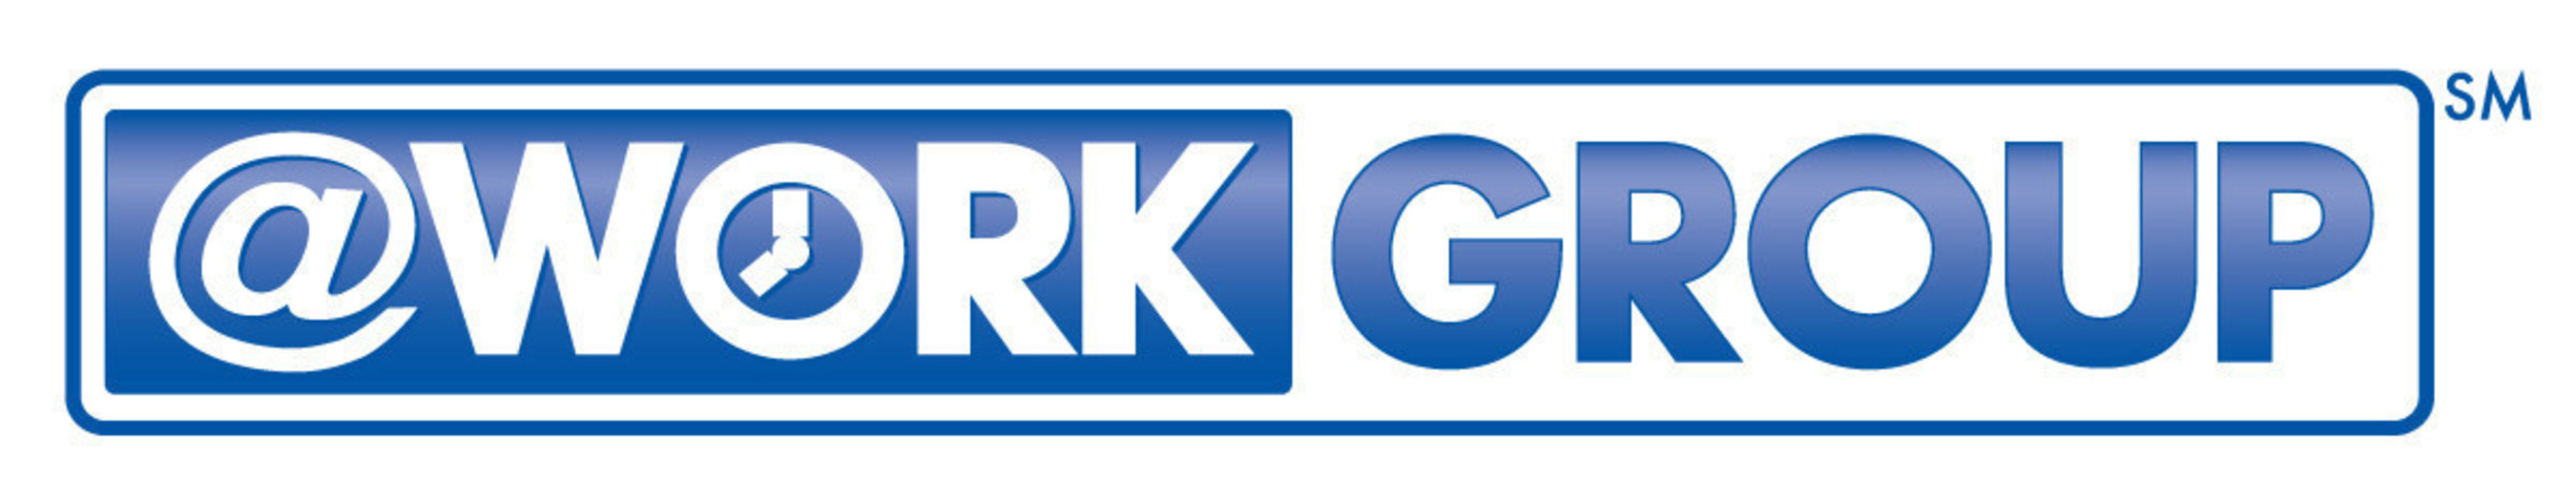 AtWork Group continues positive growth momentum